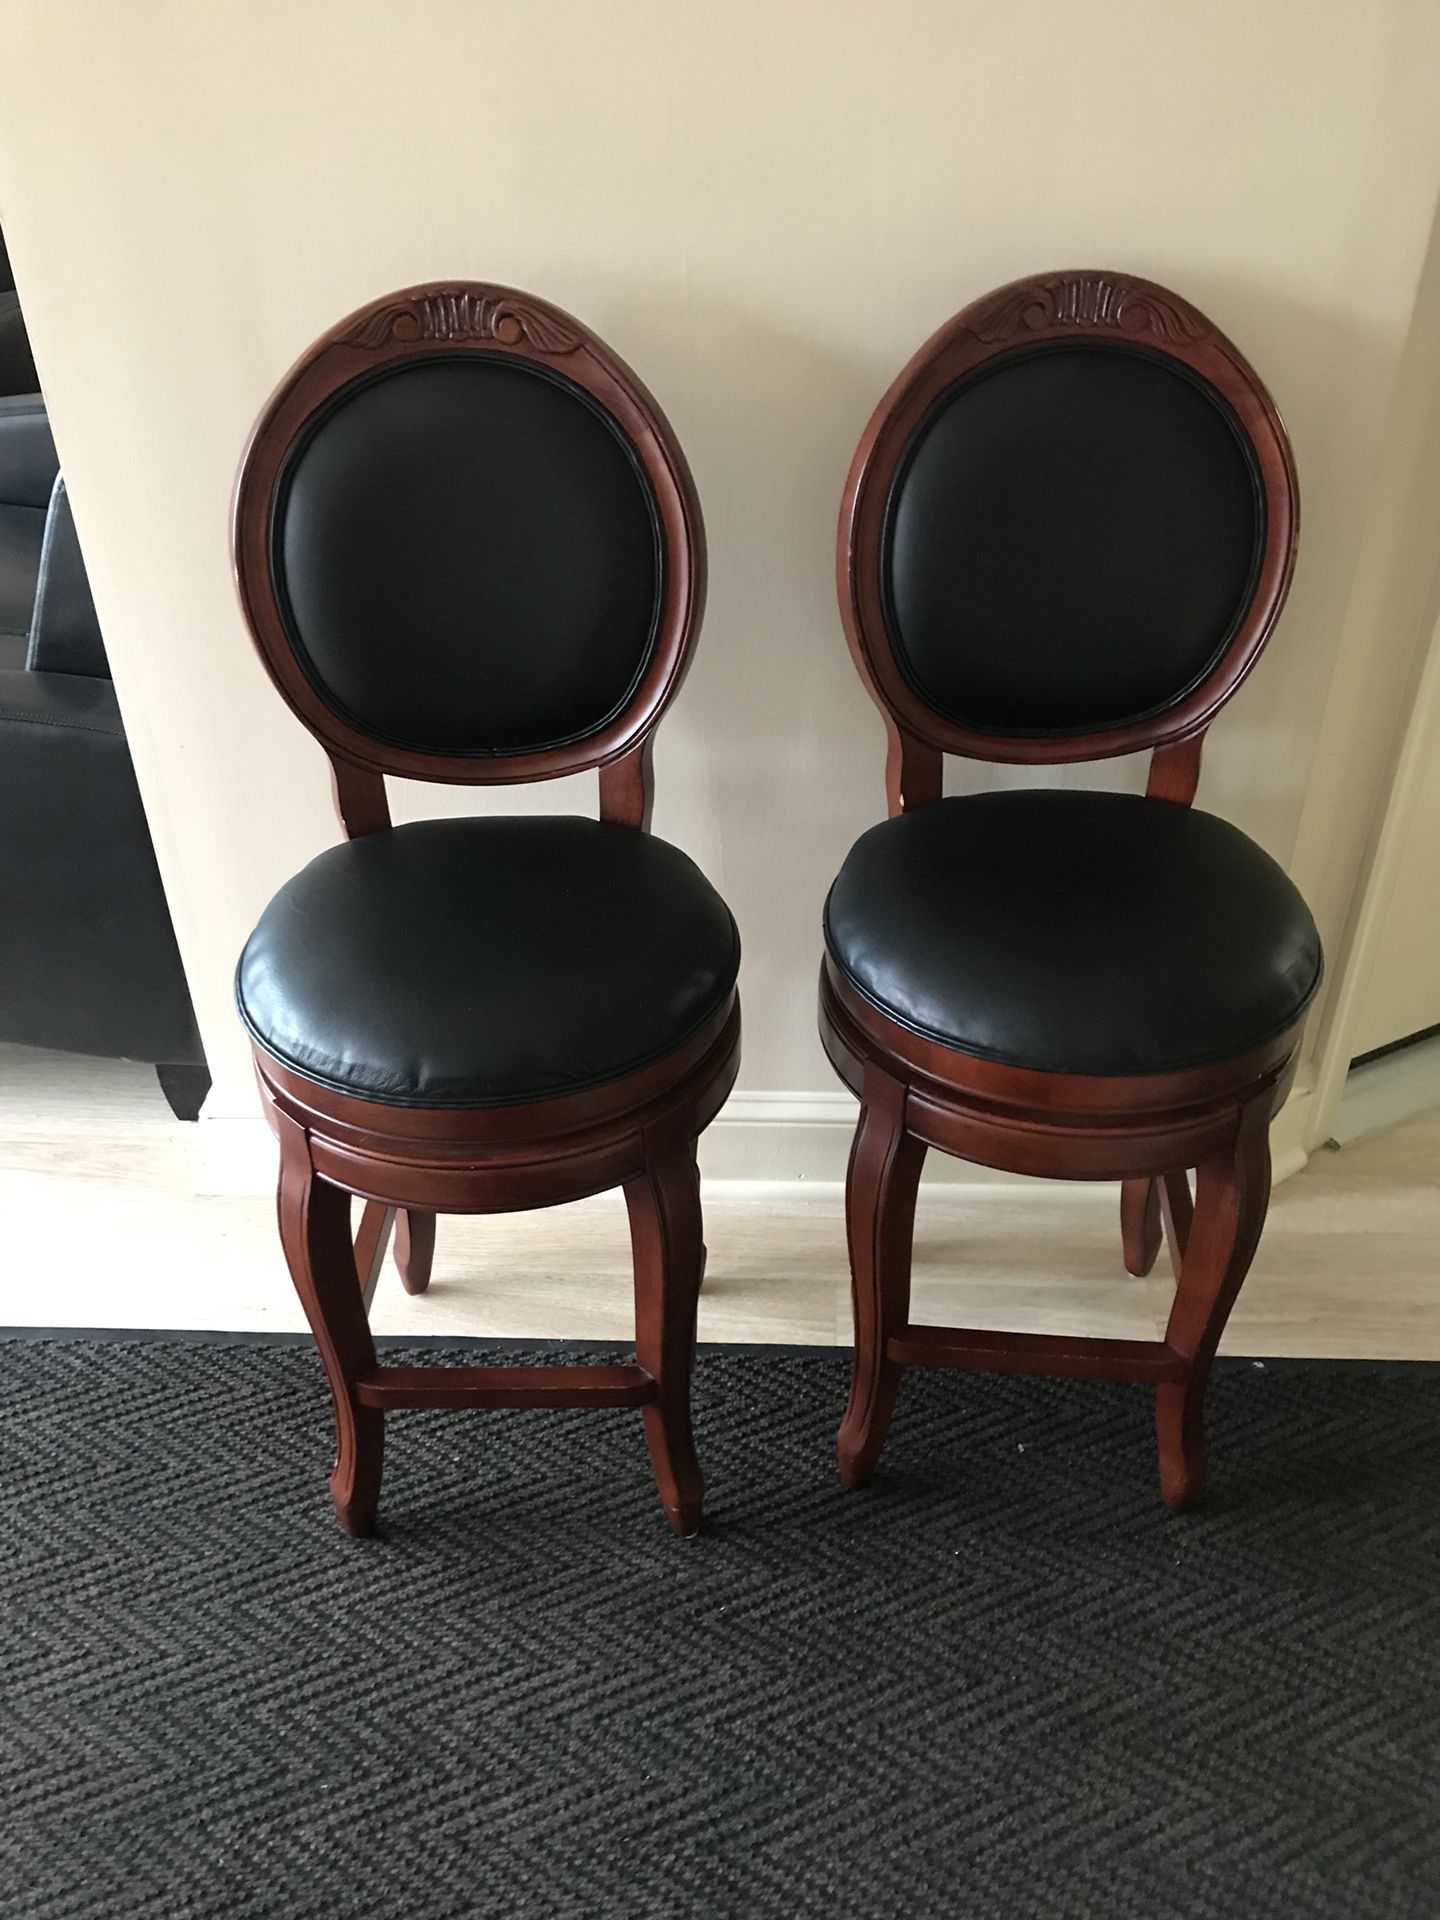 $150 for both swivel chairs ( will sell separately)